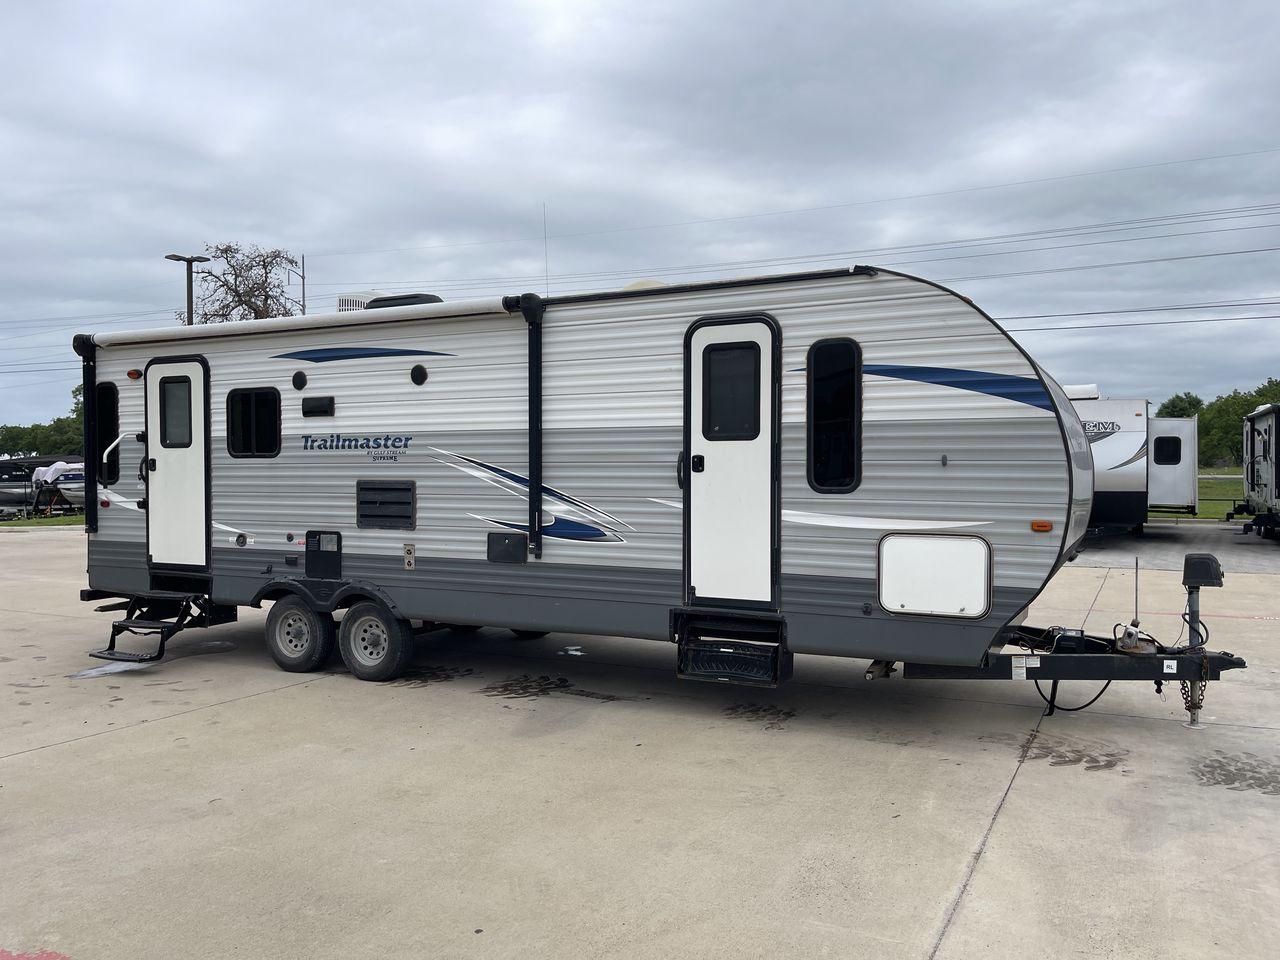 2018 GULFSTREAM TRAILMASTER 262RLS (1NL1GTP2XJ1) , Length: 31.25 ft. | Dry Weight: 6,849 lbs. | Slides: 1 transmission, located at 4319 N Main Street, Cleburne, TX, 76033, (817) 221-0660, 32.435829, -97.384178 - This 2018 Gulf Stream Trailmaster 262RLS travel trailer measures just over 31' in length. It is a dual axle, steel wheel setup with a dry weight of 6,849 lbs and a carrying capacity of 1,421 lbs. With a dry weight of 6,849 lbs., the Trailmaster 262RLS offers easy maneuverability without compromising - Photo #20